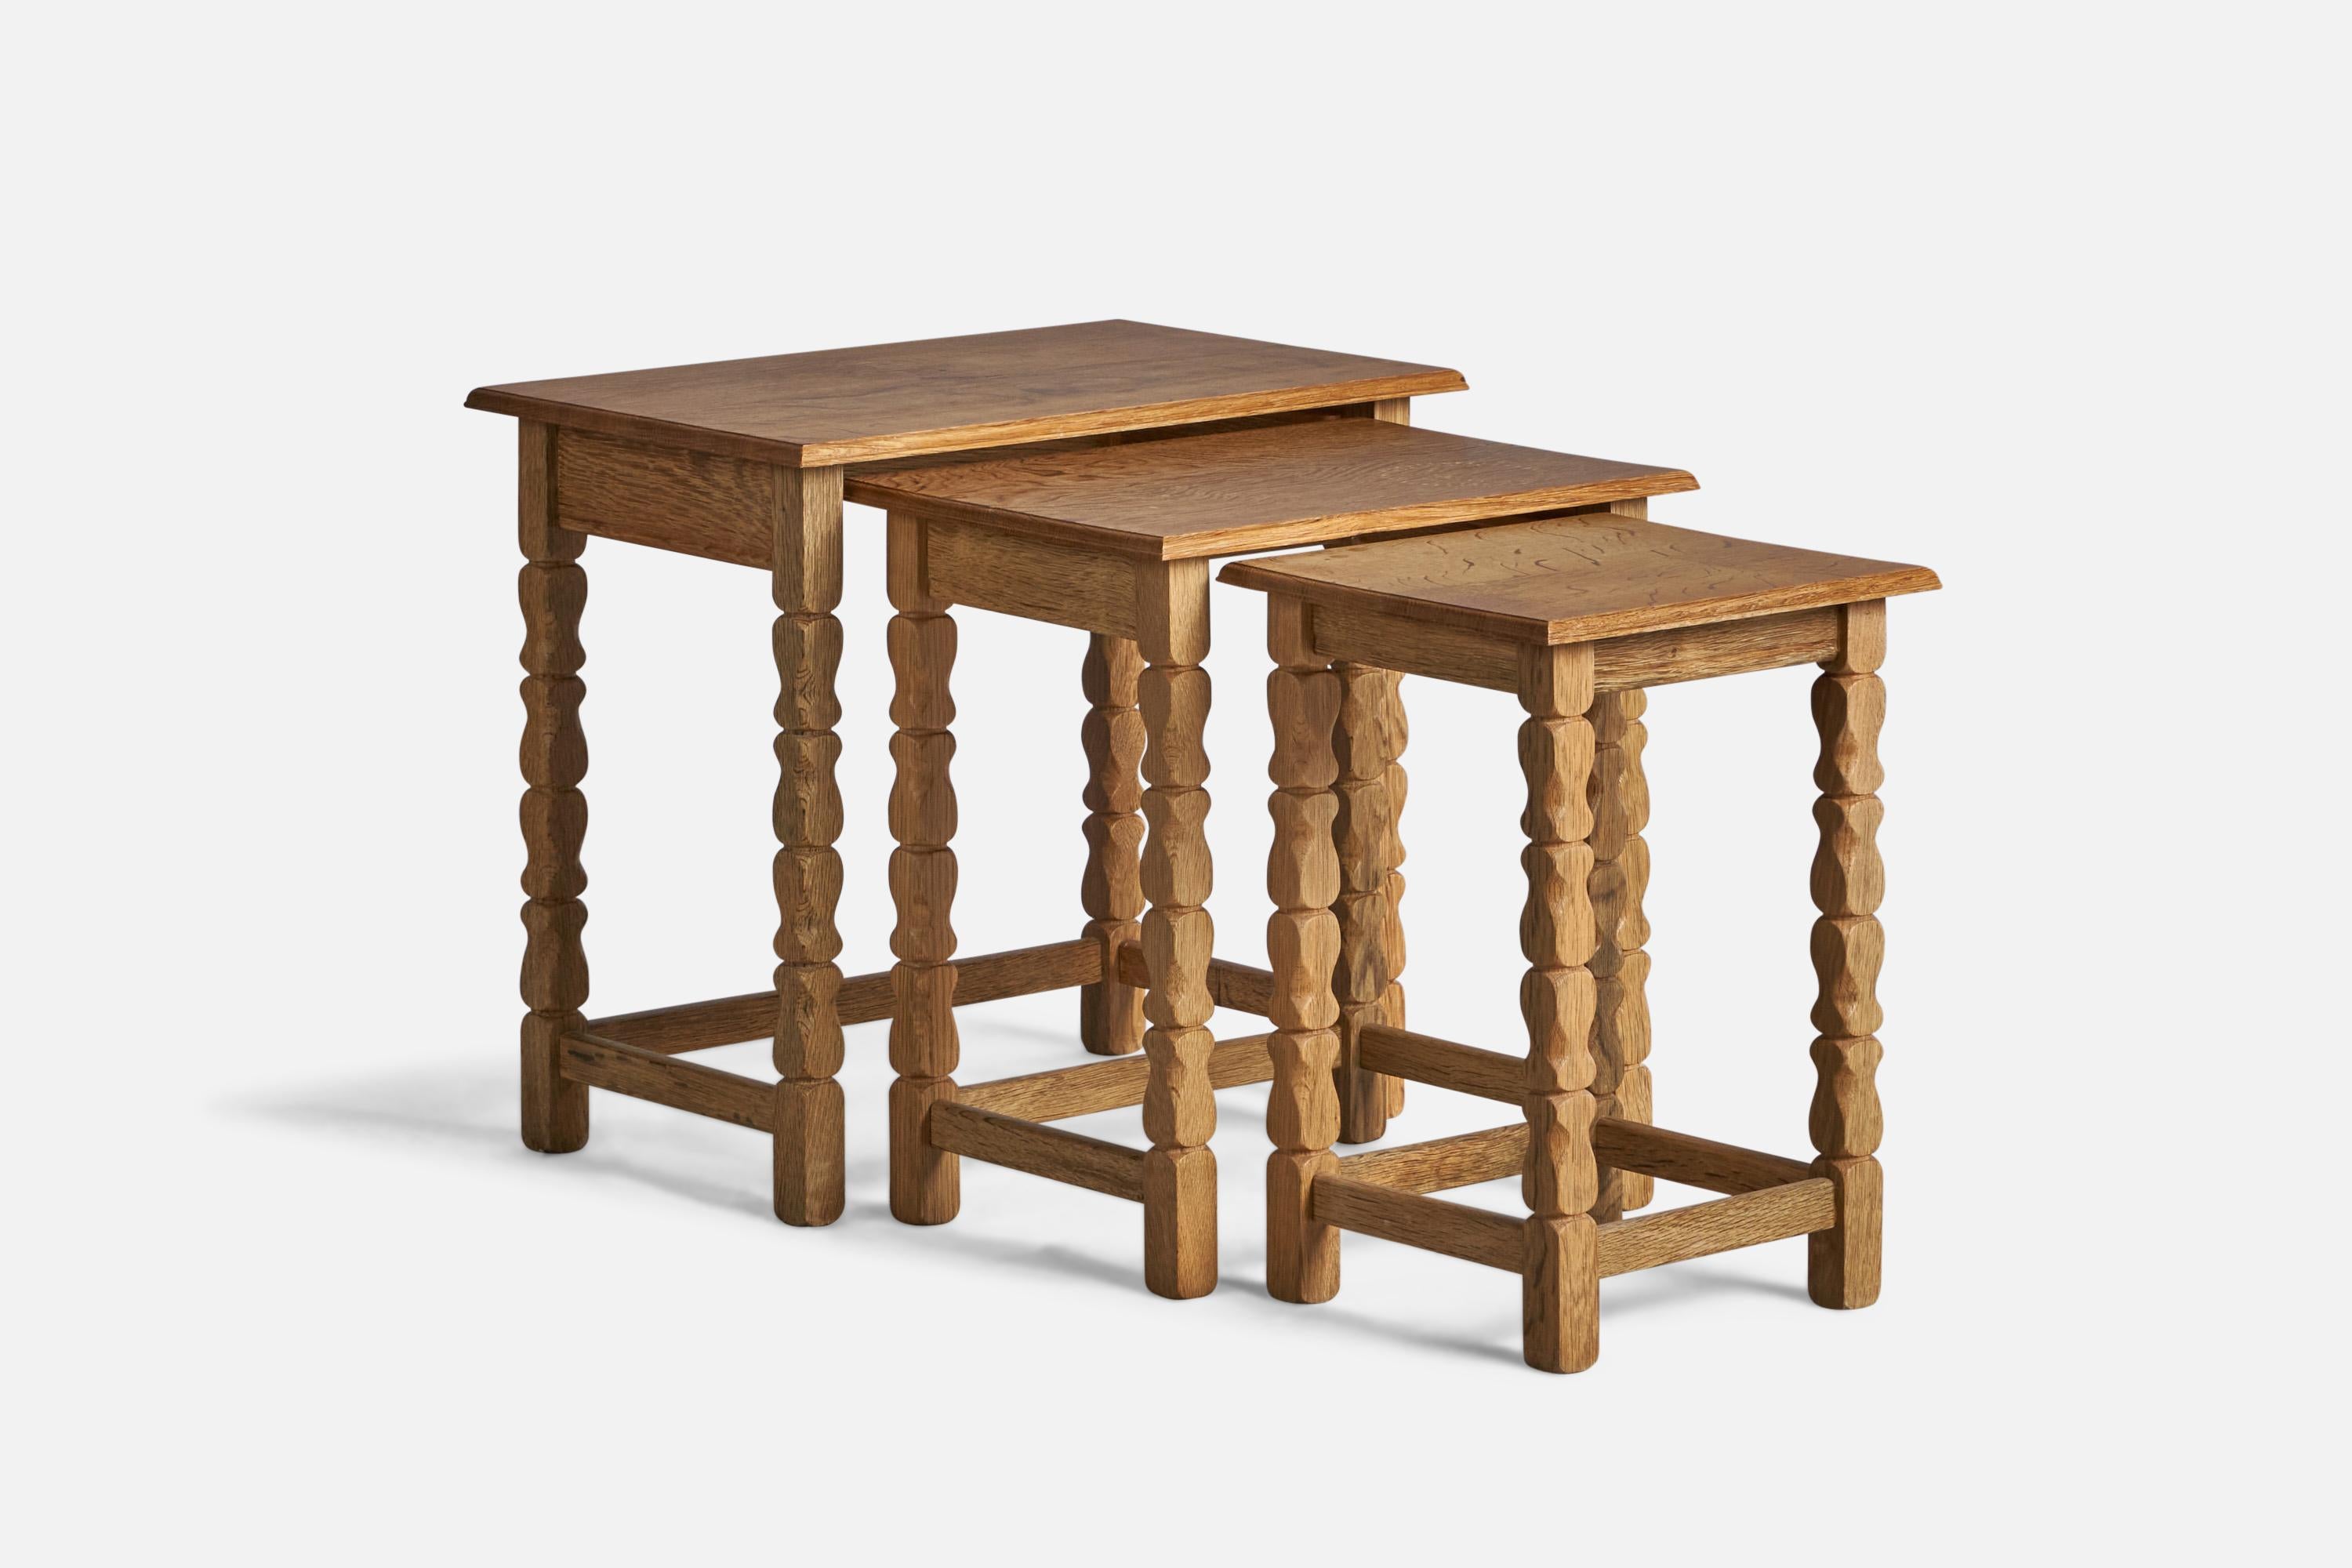 A set of 3 oak nesting tables designed and produced in Denmark, 1960s.

Smallest Dimensions: 17.5